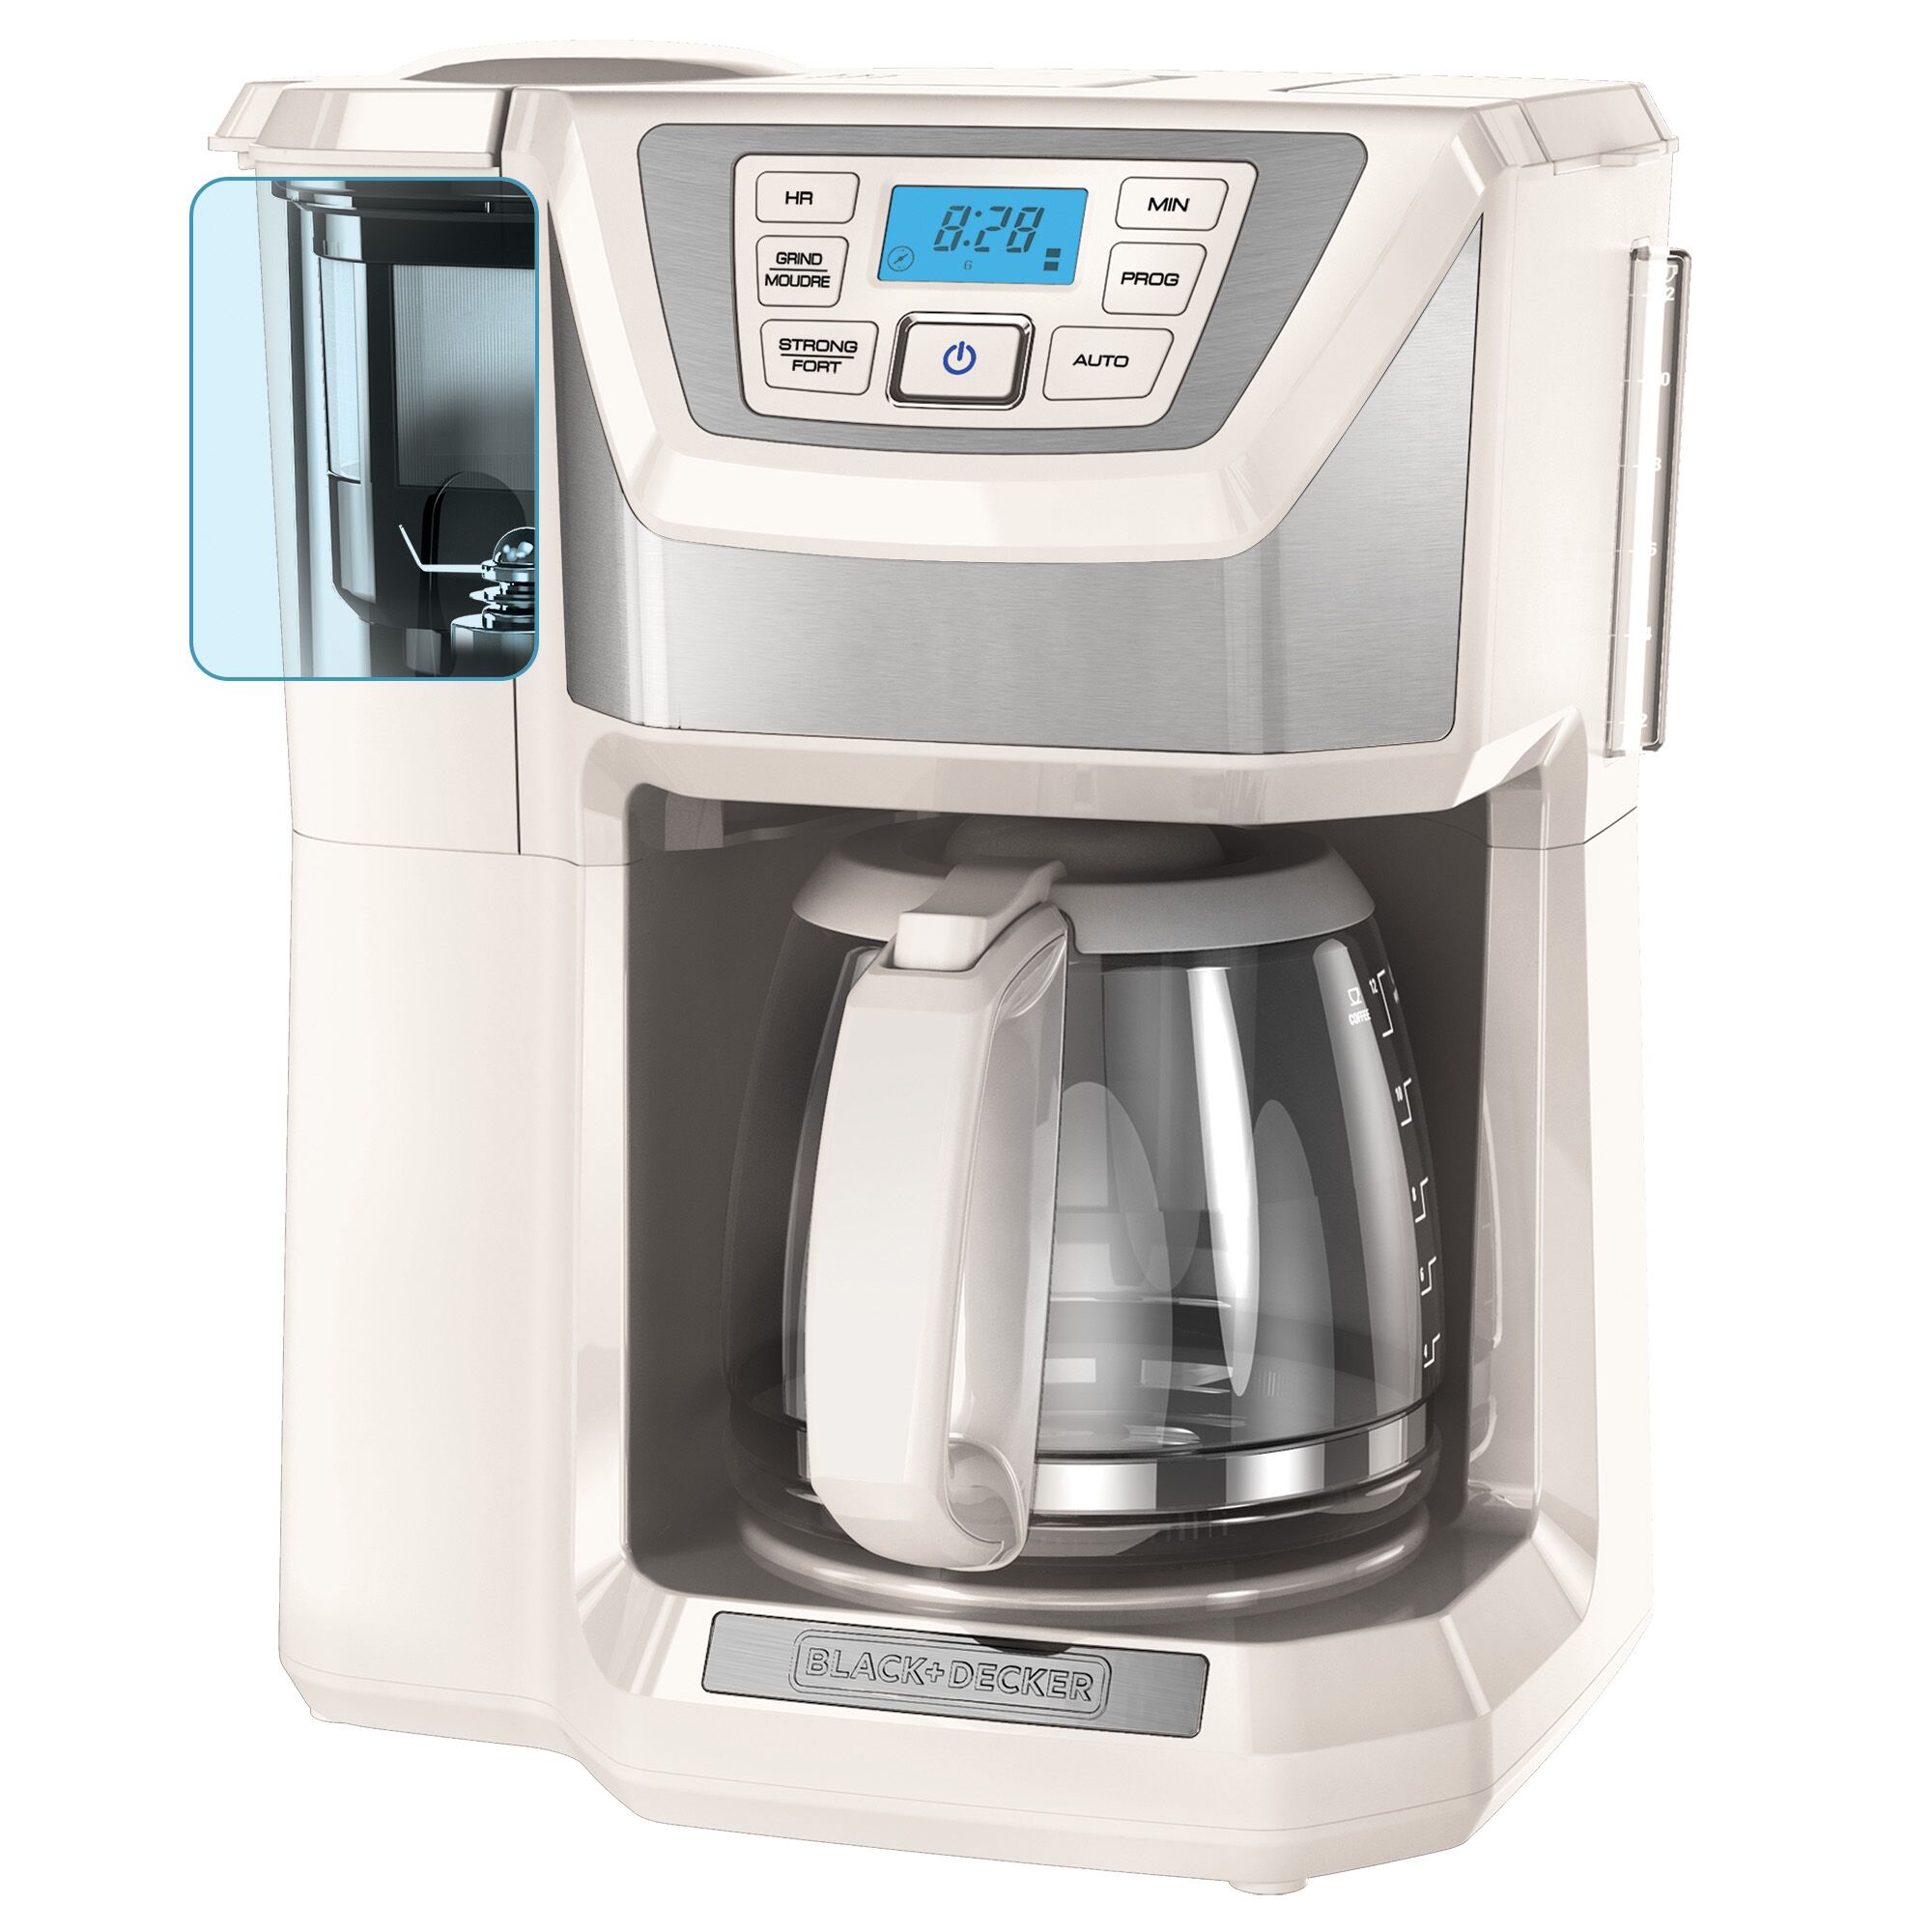 Profile of 12 Cup Mill and Brew Coffee Maker.